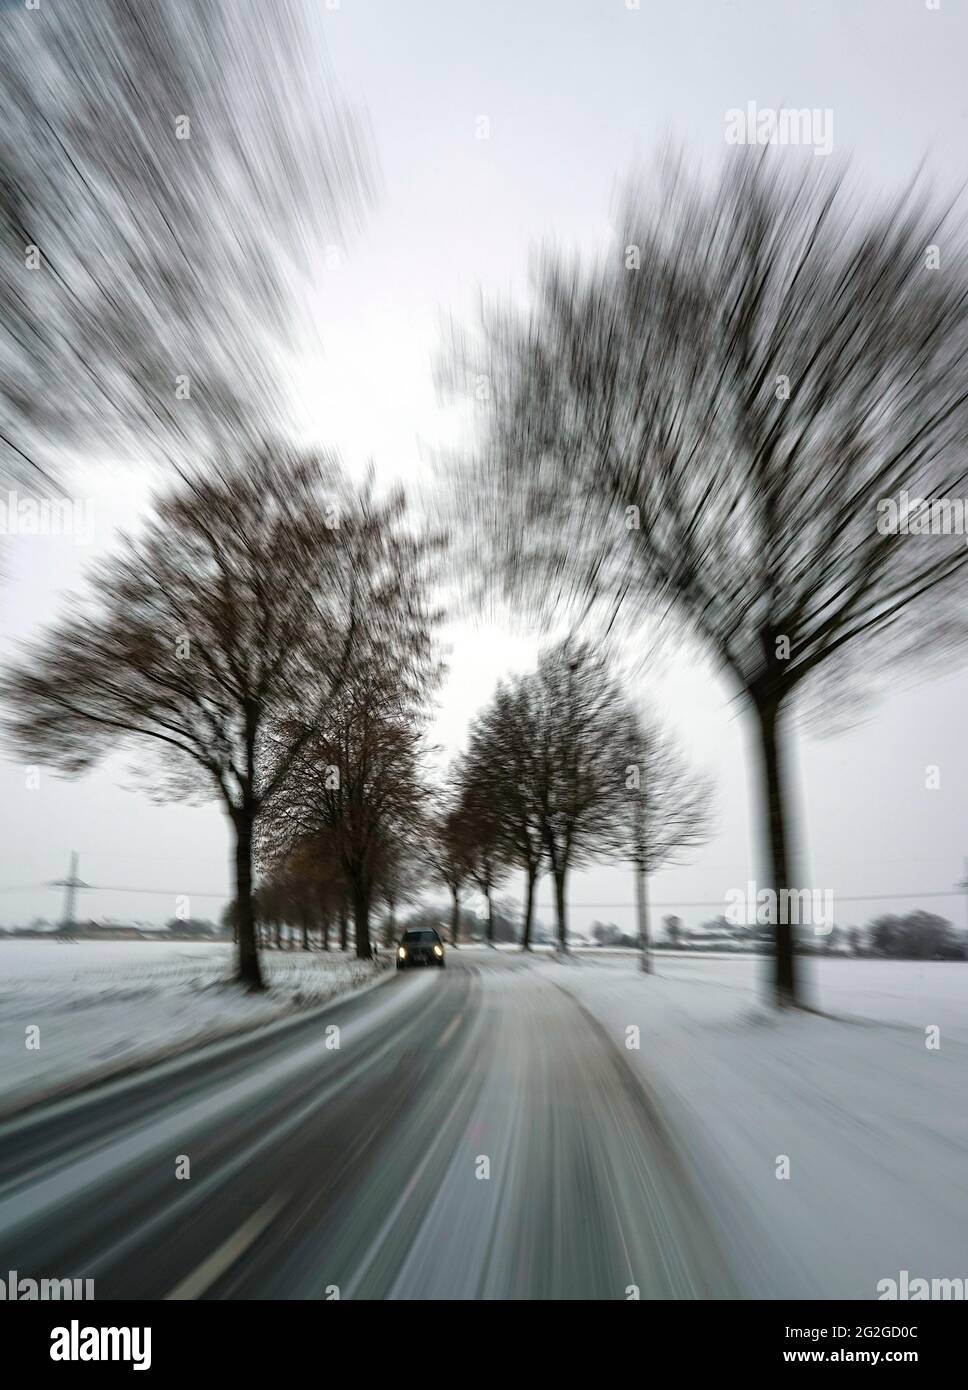 Germany, Bavaria, Upper Bavaria, Altötting district, country road, avenue, car, winter, overcast, zoomed Stock Photo